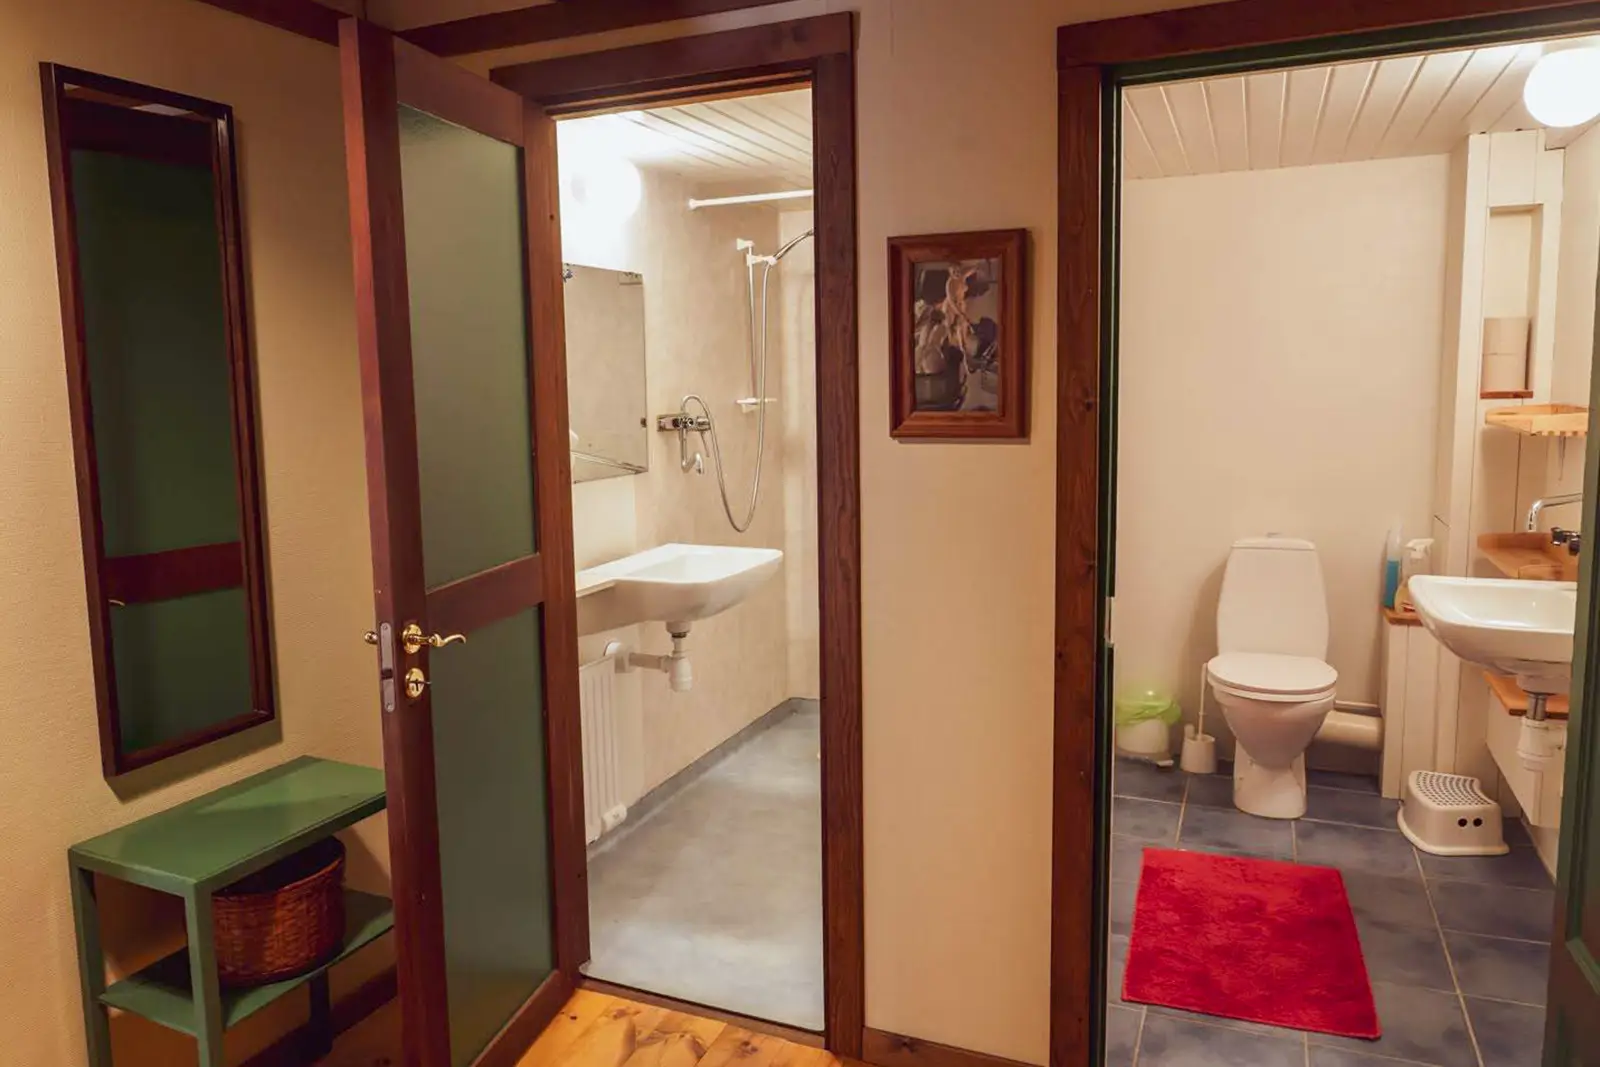 Since the shower and toilet are in separate rooms both can be used simultaneously by our guests.